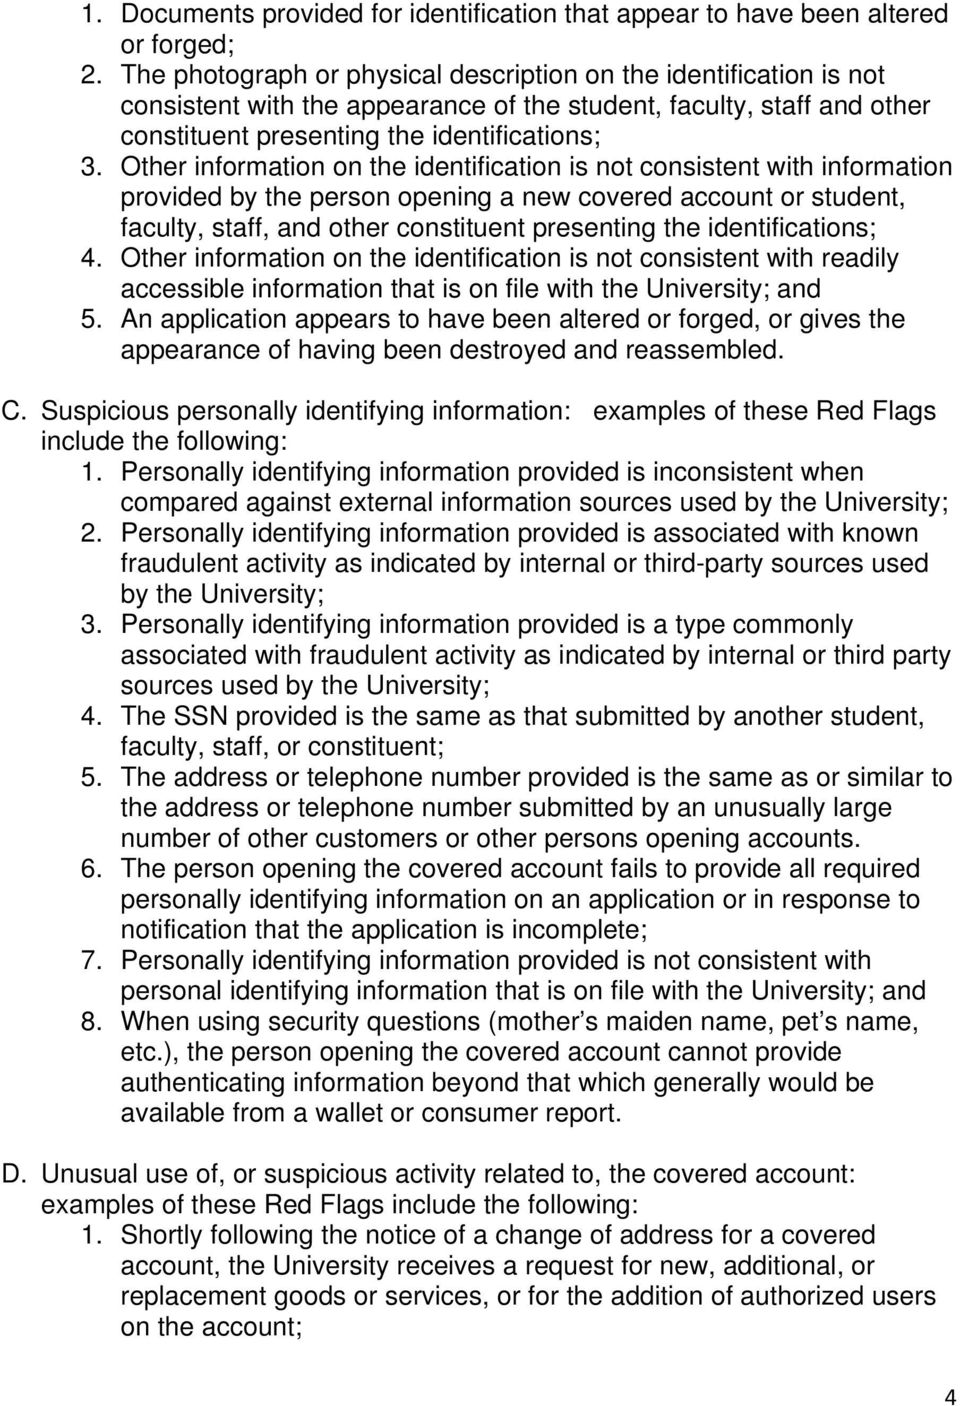 Other information on the identification is not consistent with information provided by the person opening a new covered account or student, faculty, staff, and other constituent presenting the